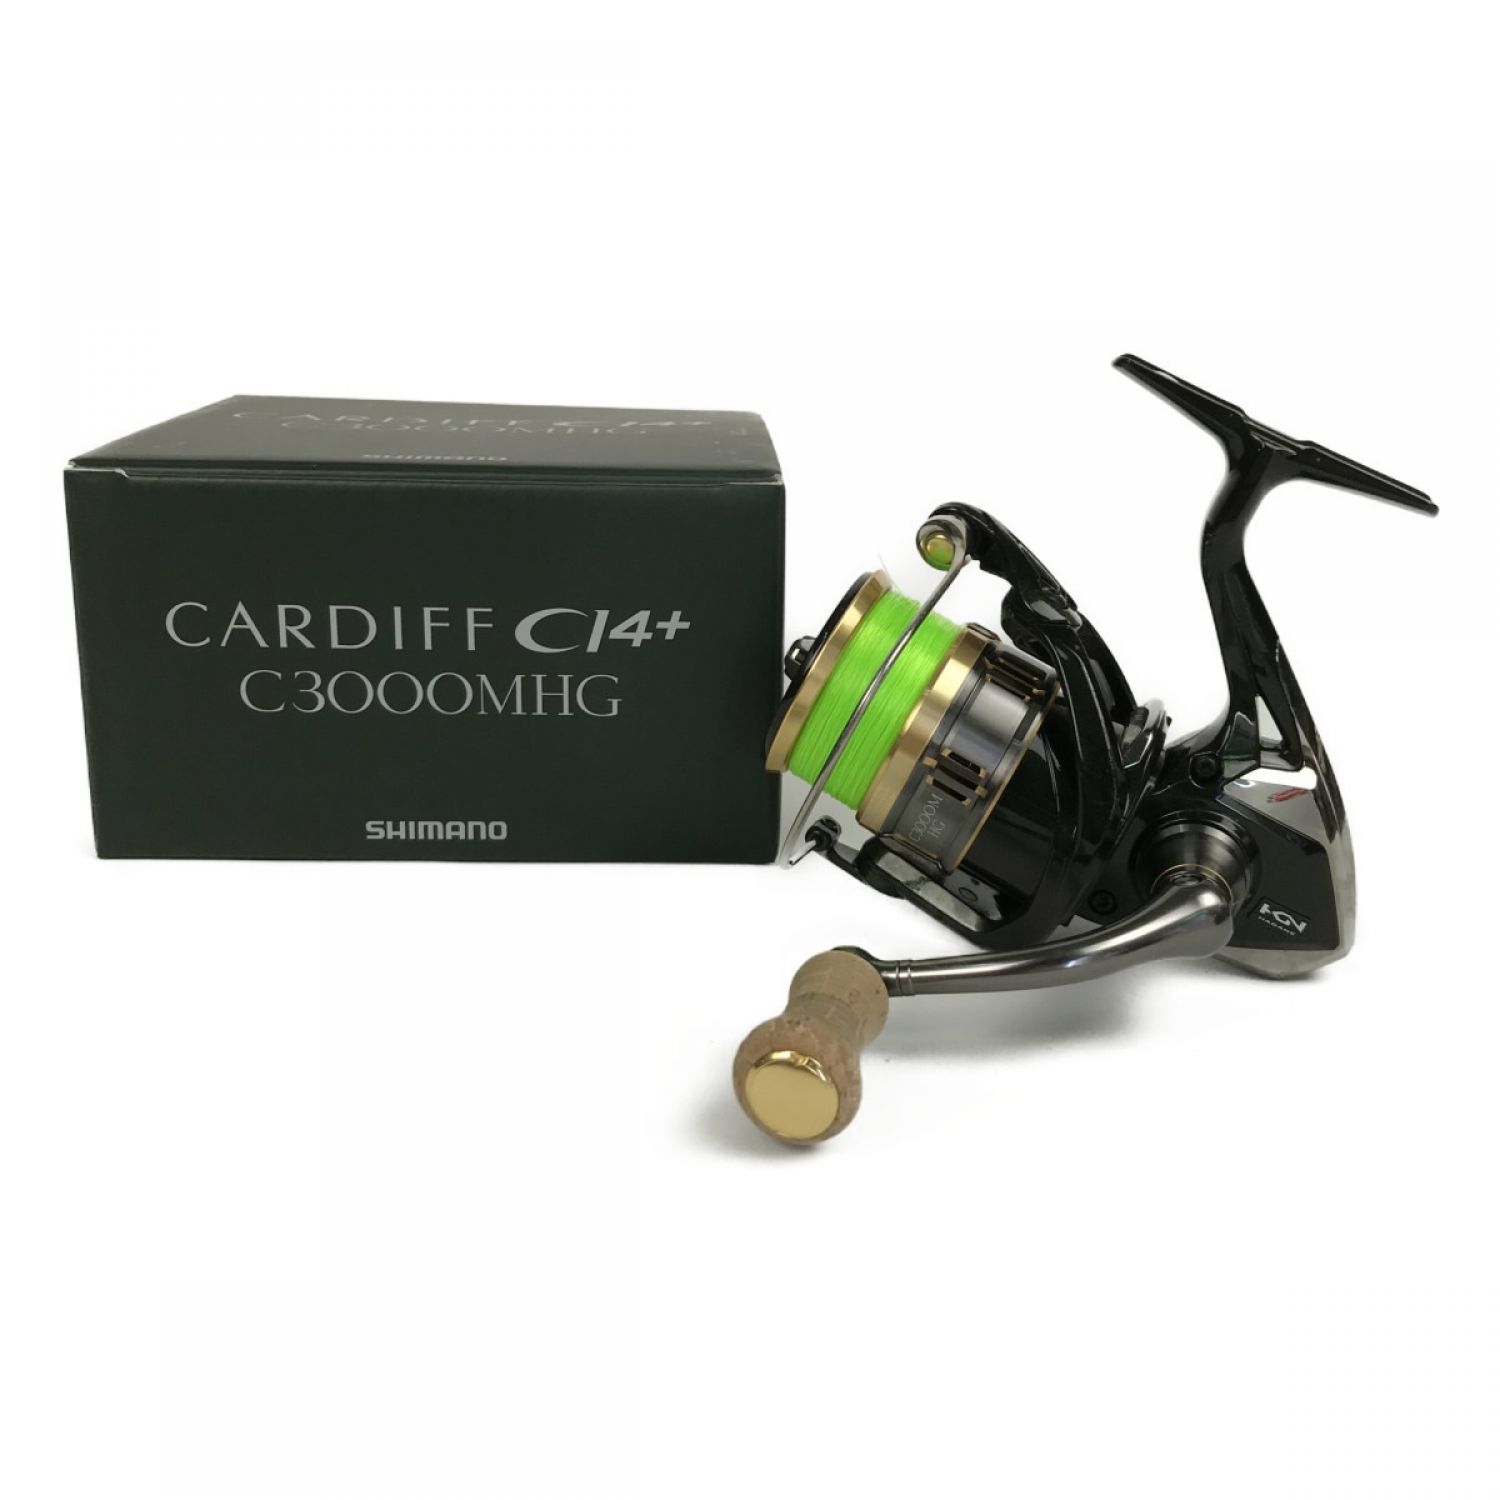 Spinning Reel Trout 18 Cardiff CI4+ C3000MHG 6.0:1 Fishing Reel IN BOX 